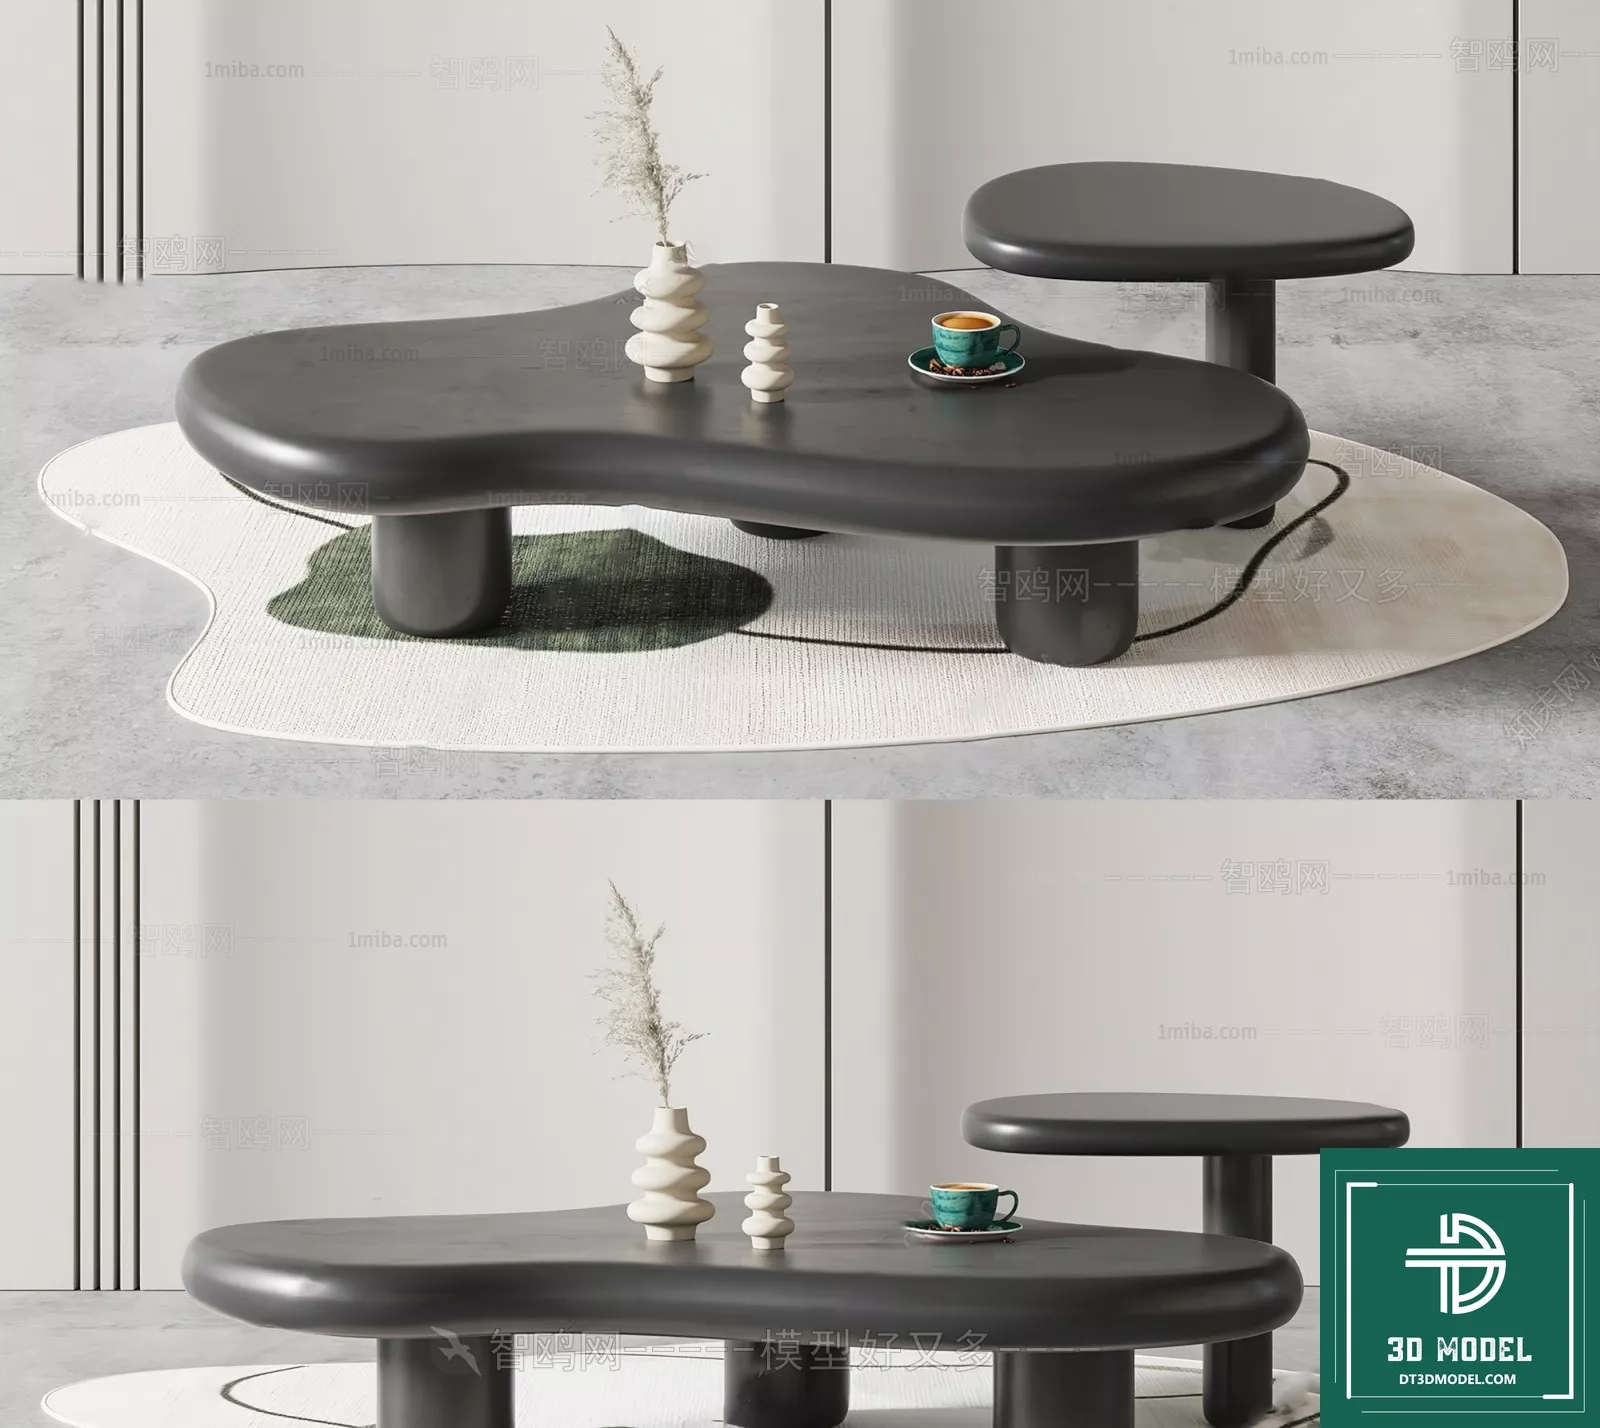 MODERN TEA TABLE - SKETCHUP 3D MODEL - VRAY OR ENSCAPE - ID14949